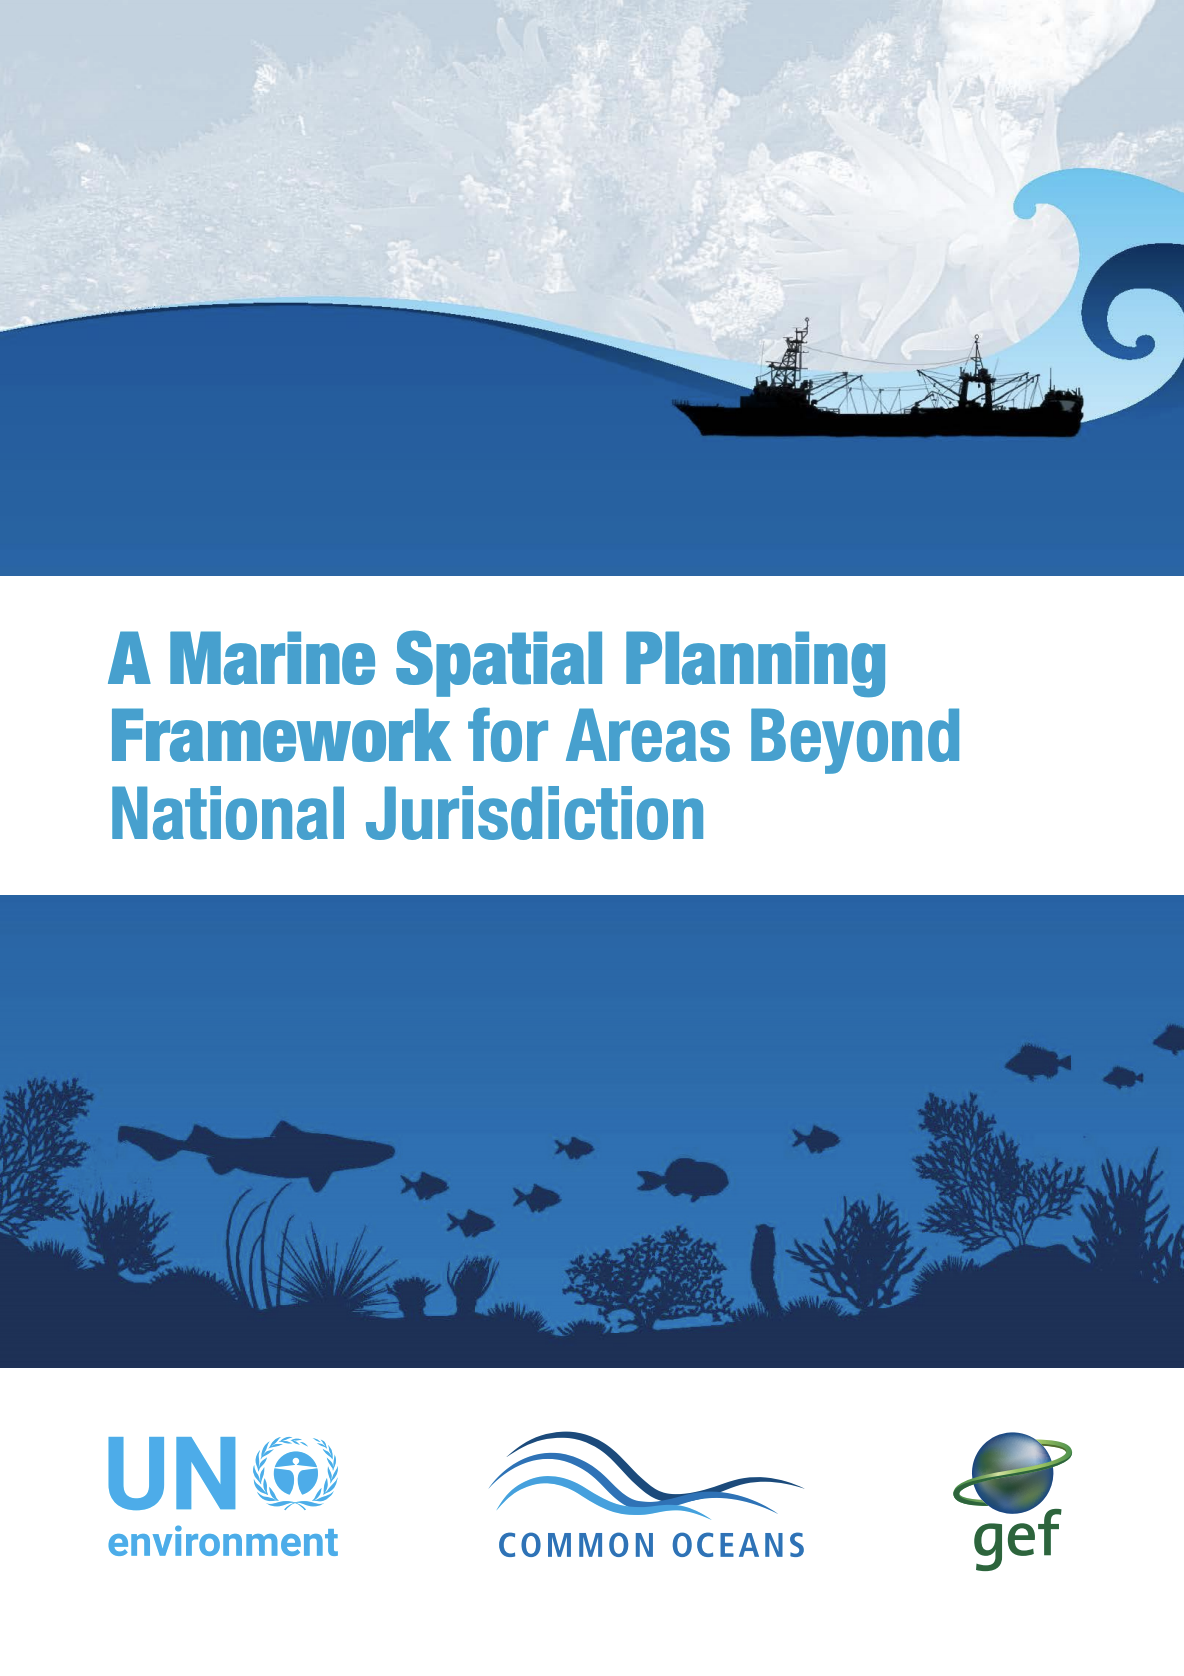 A Marine Spatial Planning Framework for Areas Beyond National Jurisdiction